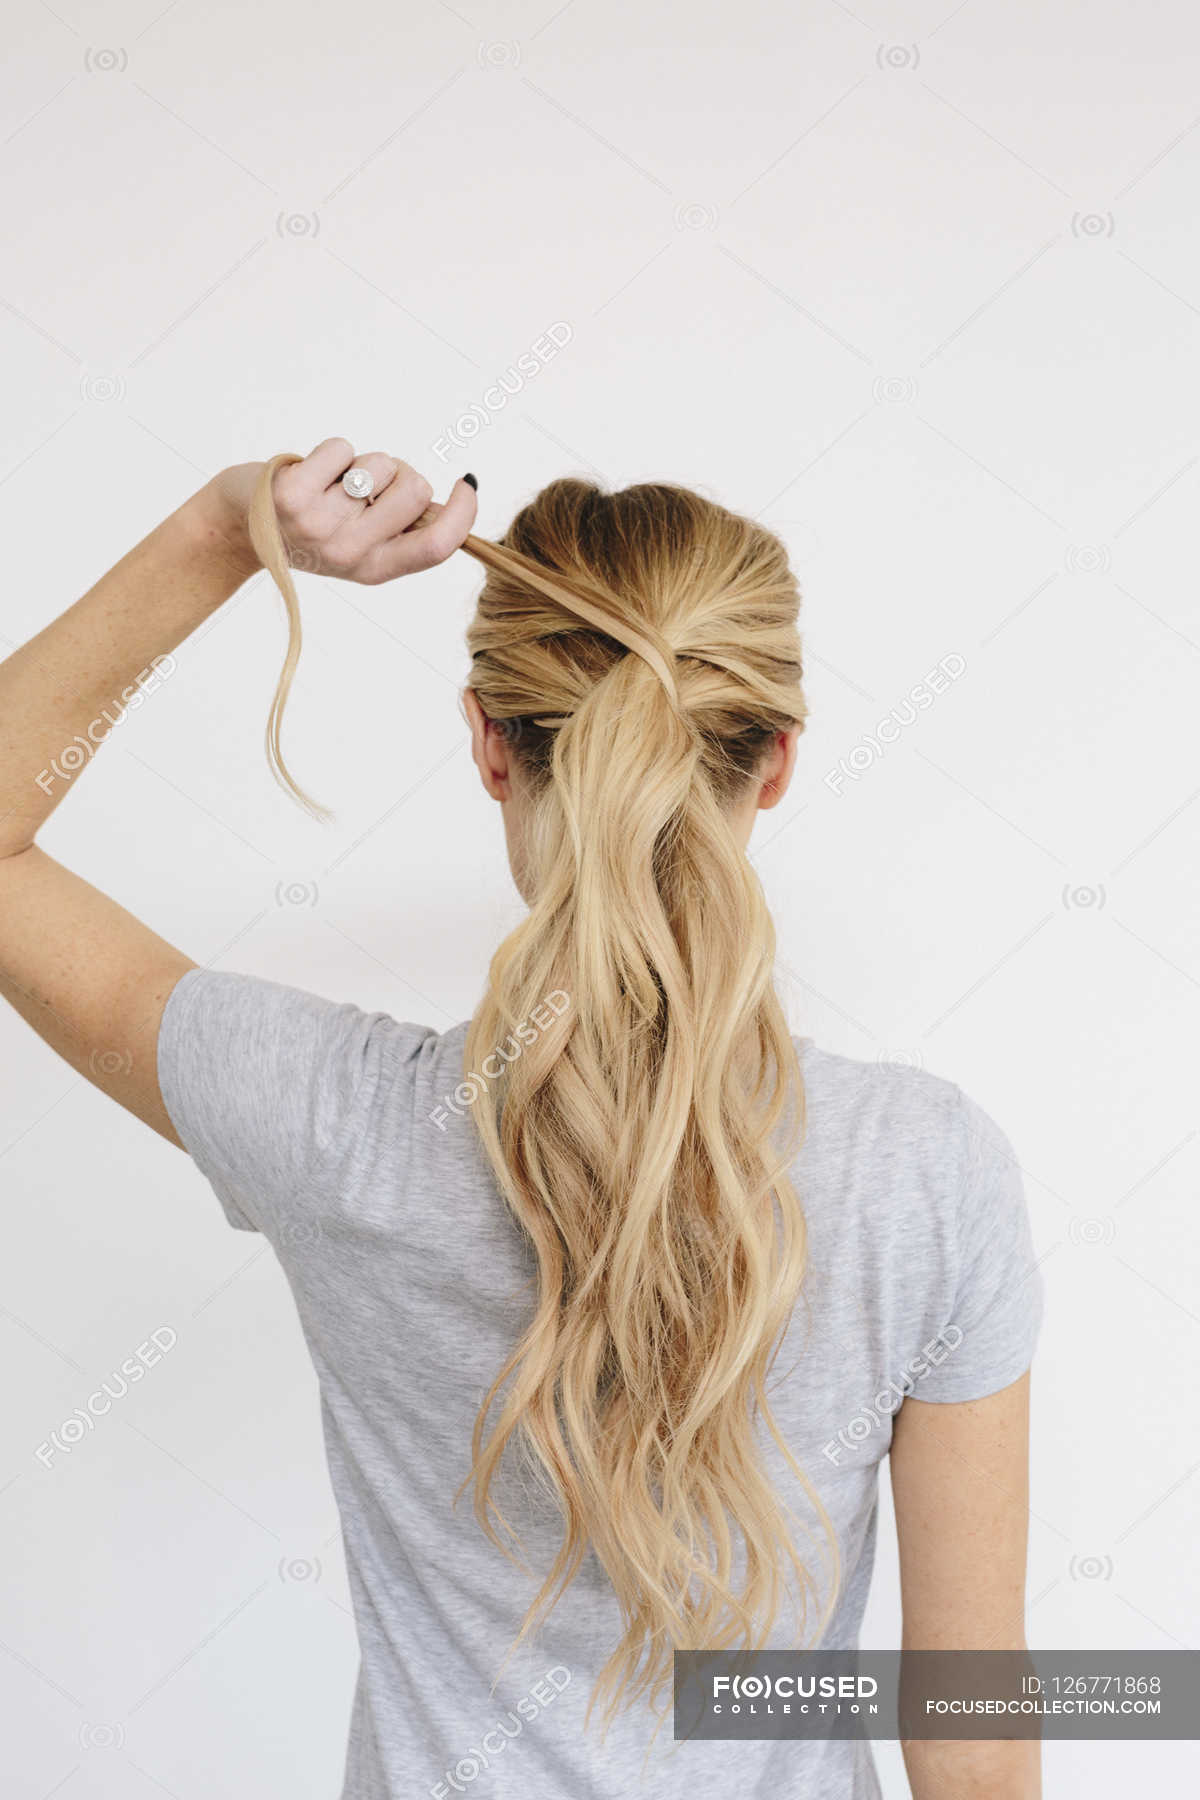 Woman with blond hair tied in ponytail — wavy hair, long - Stock Photo |  #126771868